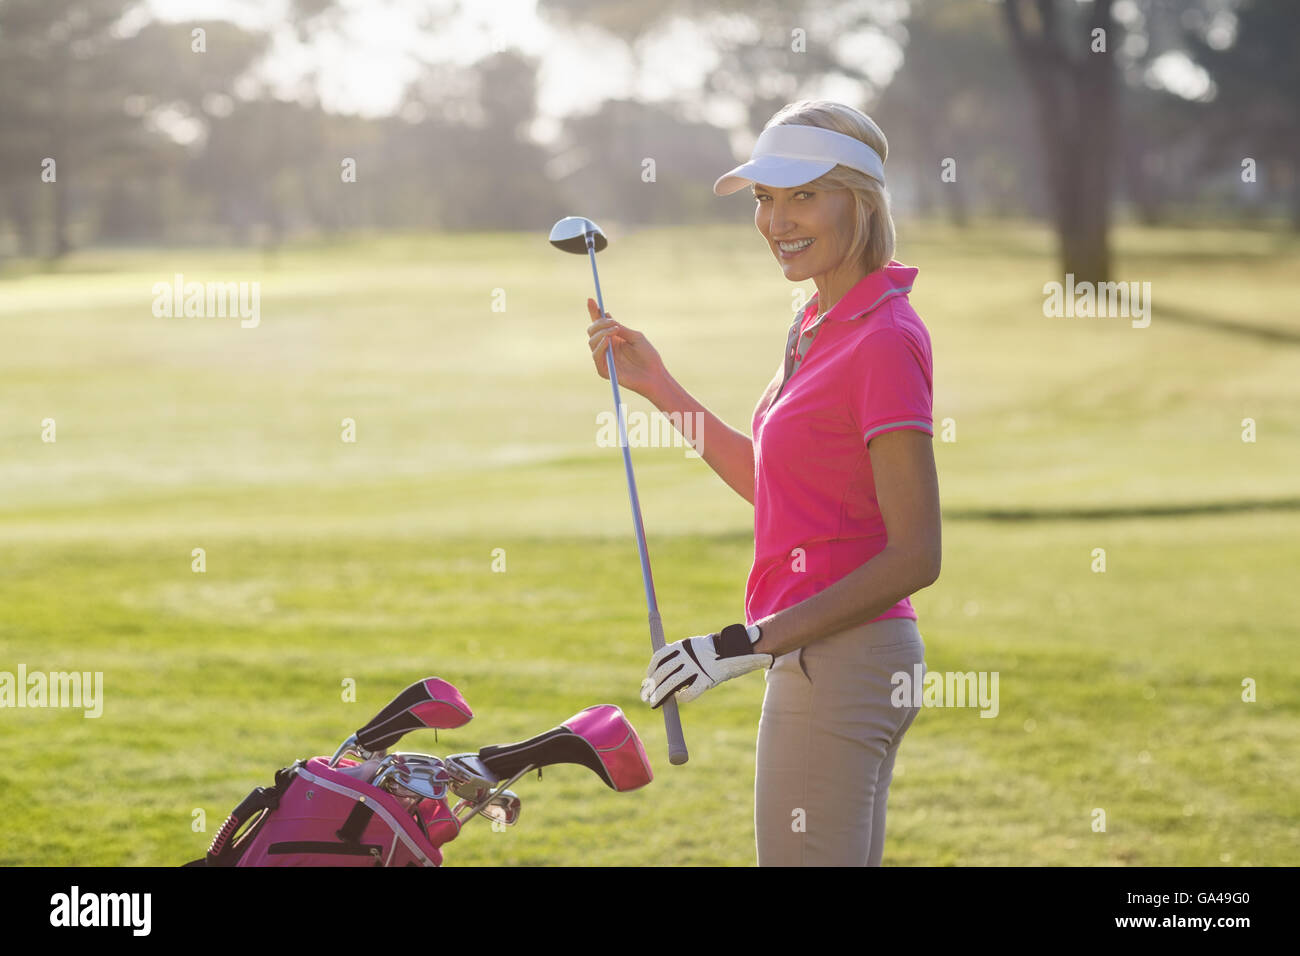 Portrait of young woman carrying golf club Banque D'Images